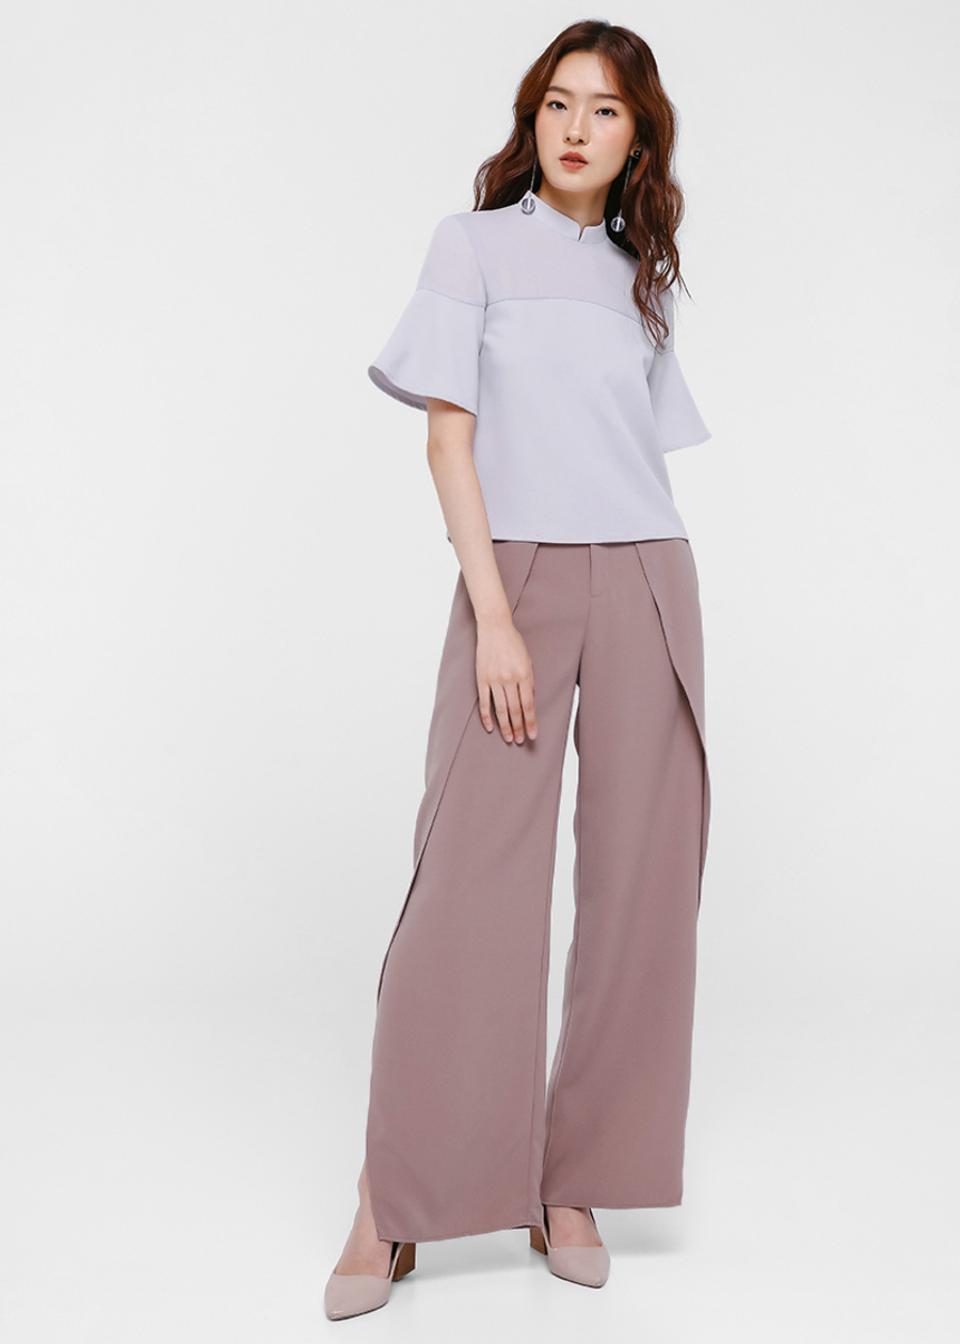 Buy Lamees Flutter Sleeve Top @ Love, Bonito Singapore